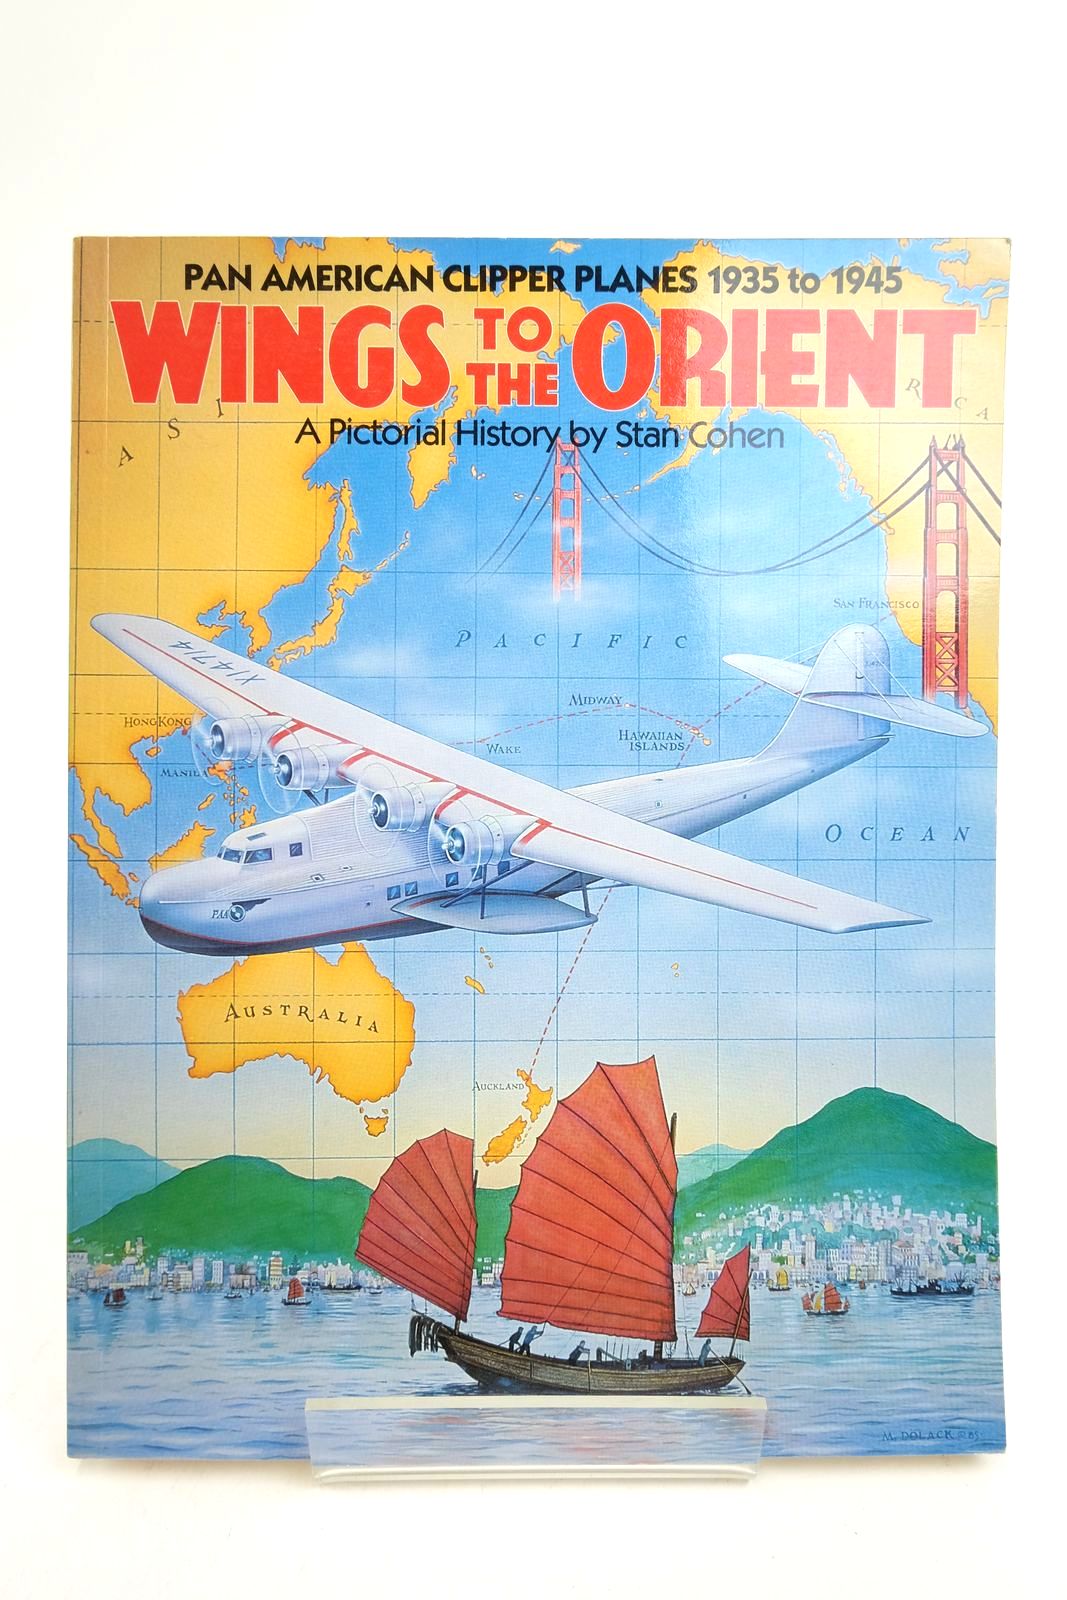 Photo of PAN AMERICAN CLIPPER PLANES 1935 TO 1945 WINGS TO THE ORIENT A PICTORIAL HISTORY written by Cohen, Stan published by Pictorial Histories Publishing Company (STOCK CODE: 2139399)  for sale by Stella & Rose's Books